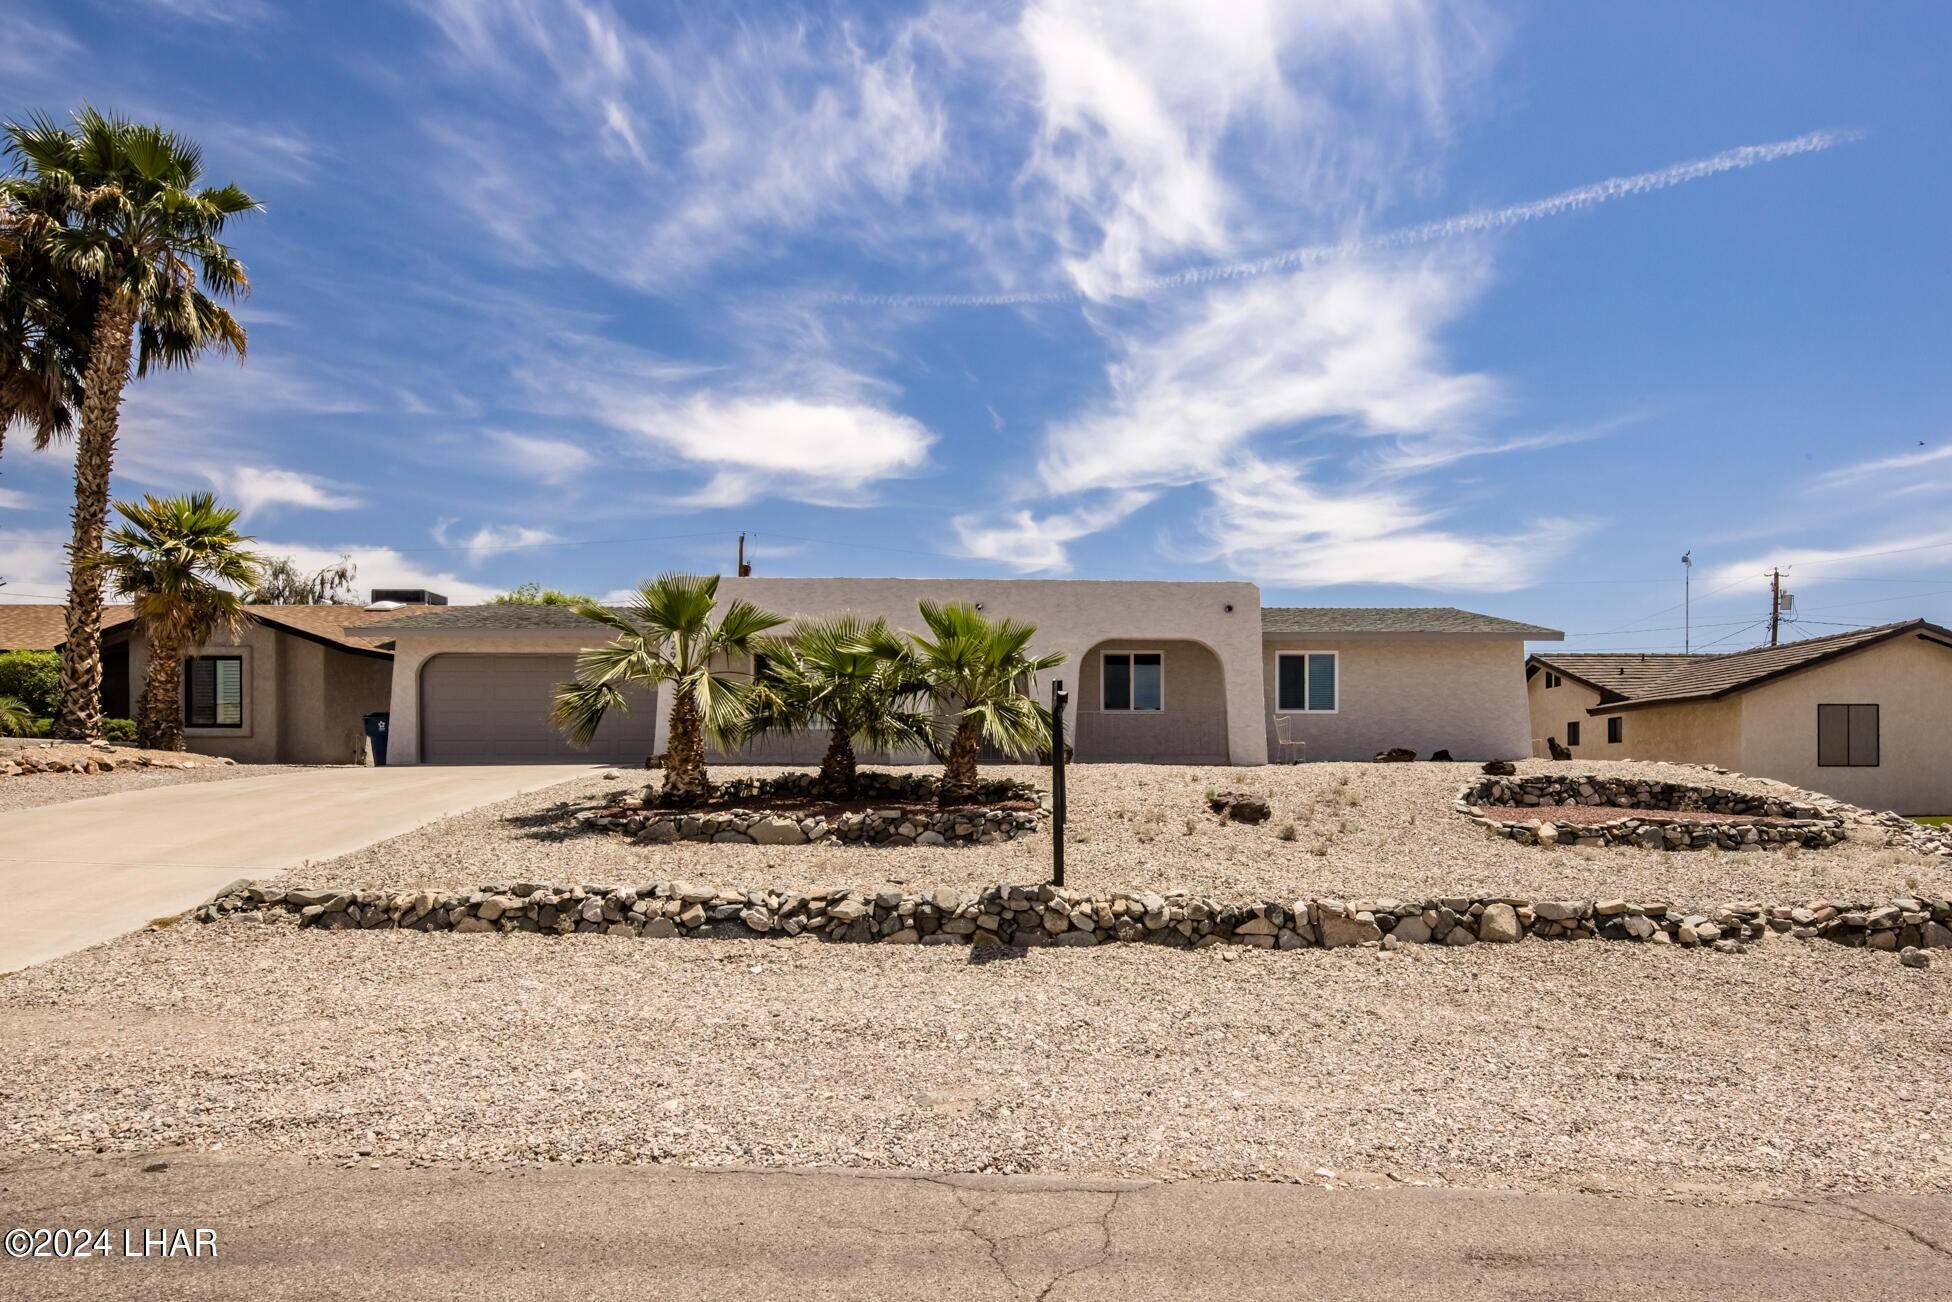 Property Image for 2920 Yuma Dr